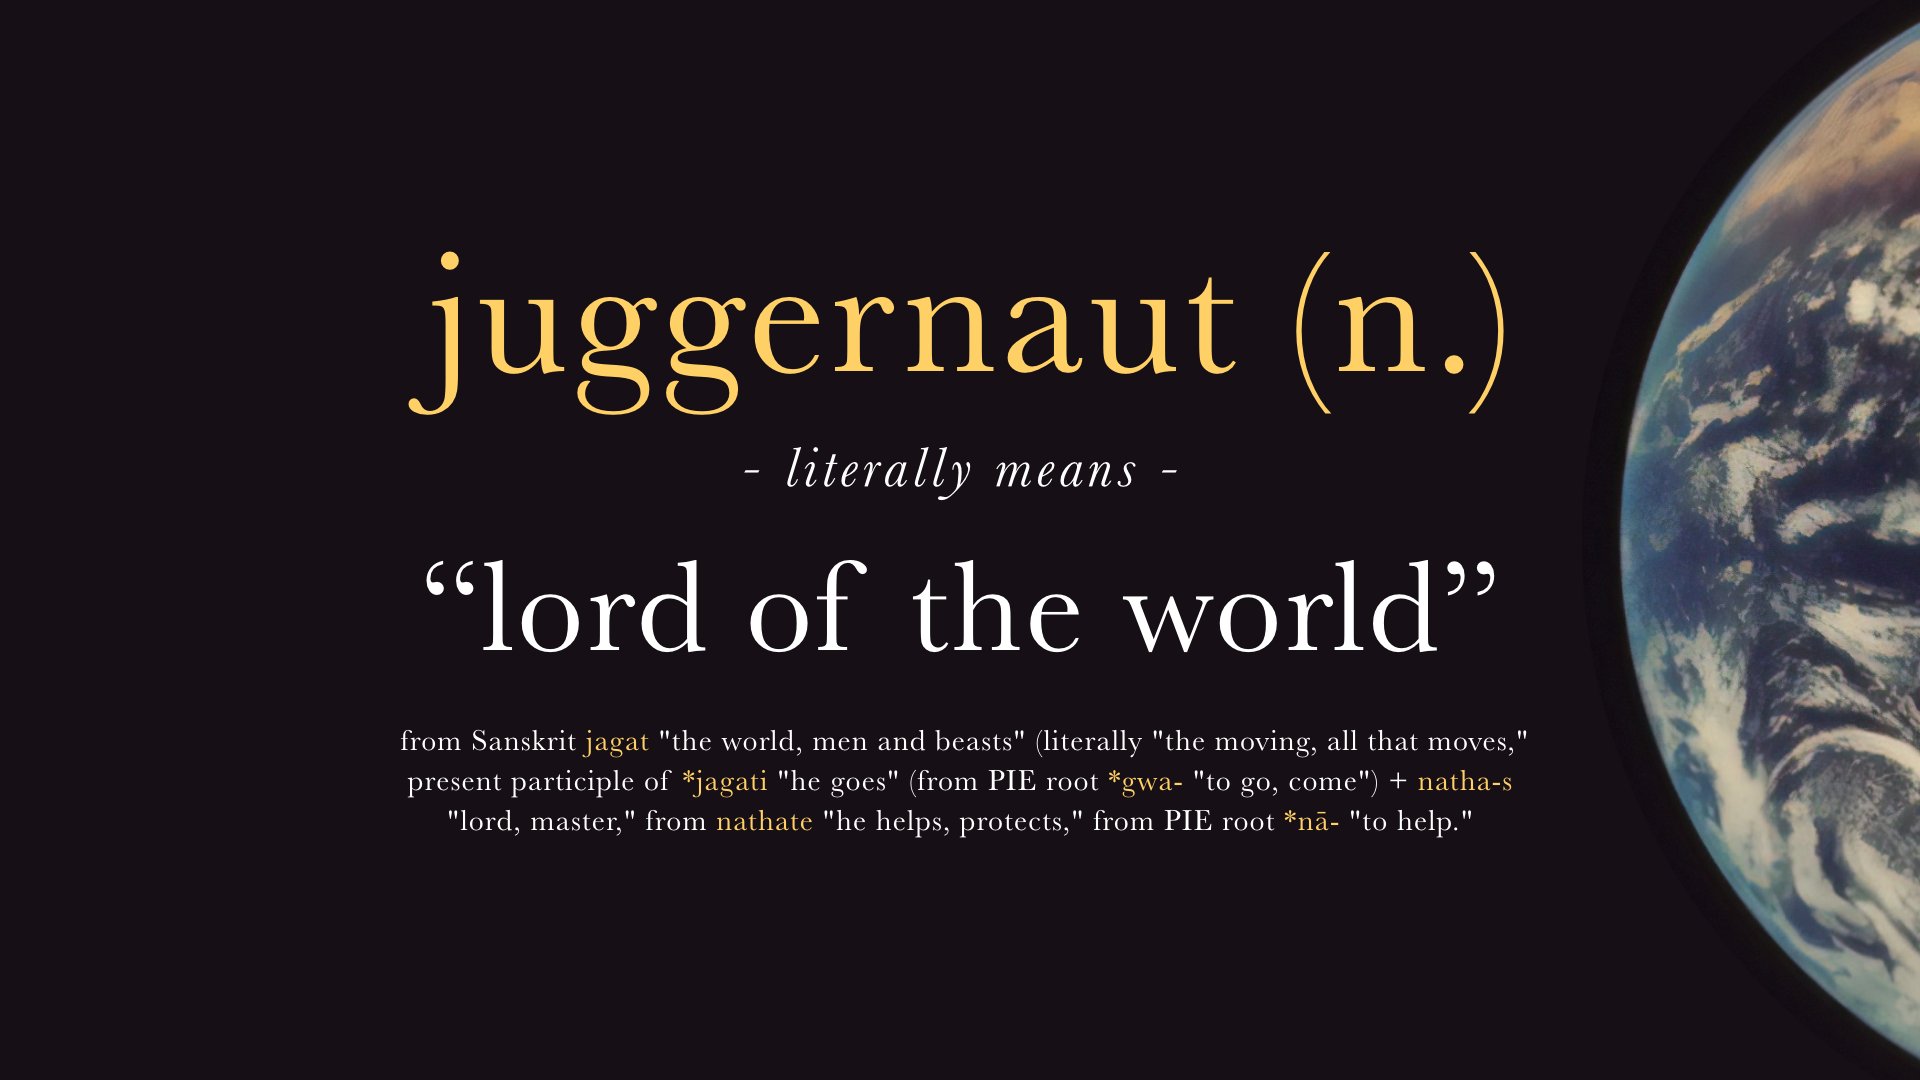 what does juggernaut mean and where does the word juggernaut come from